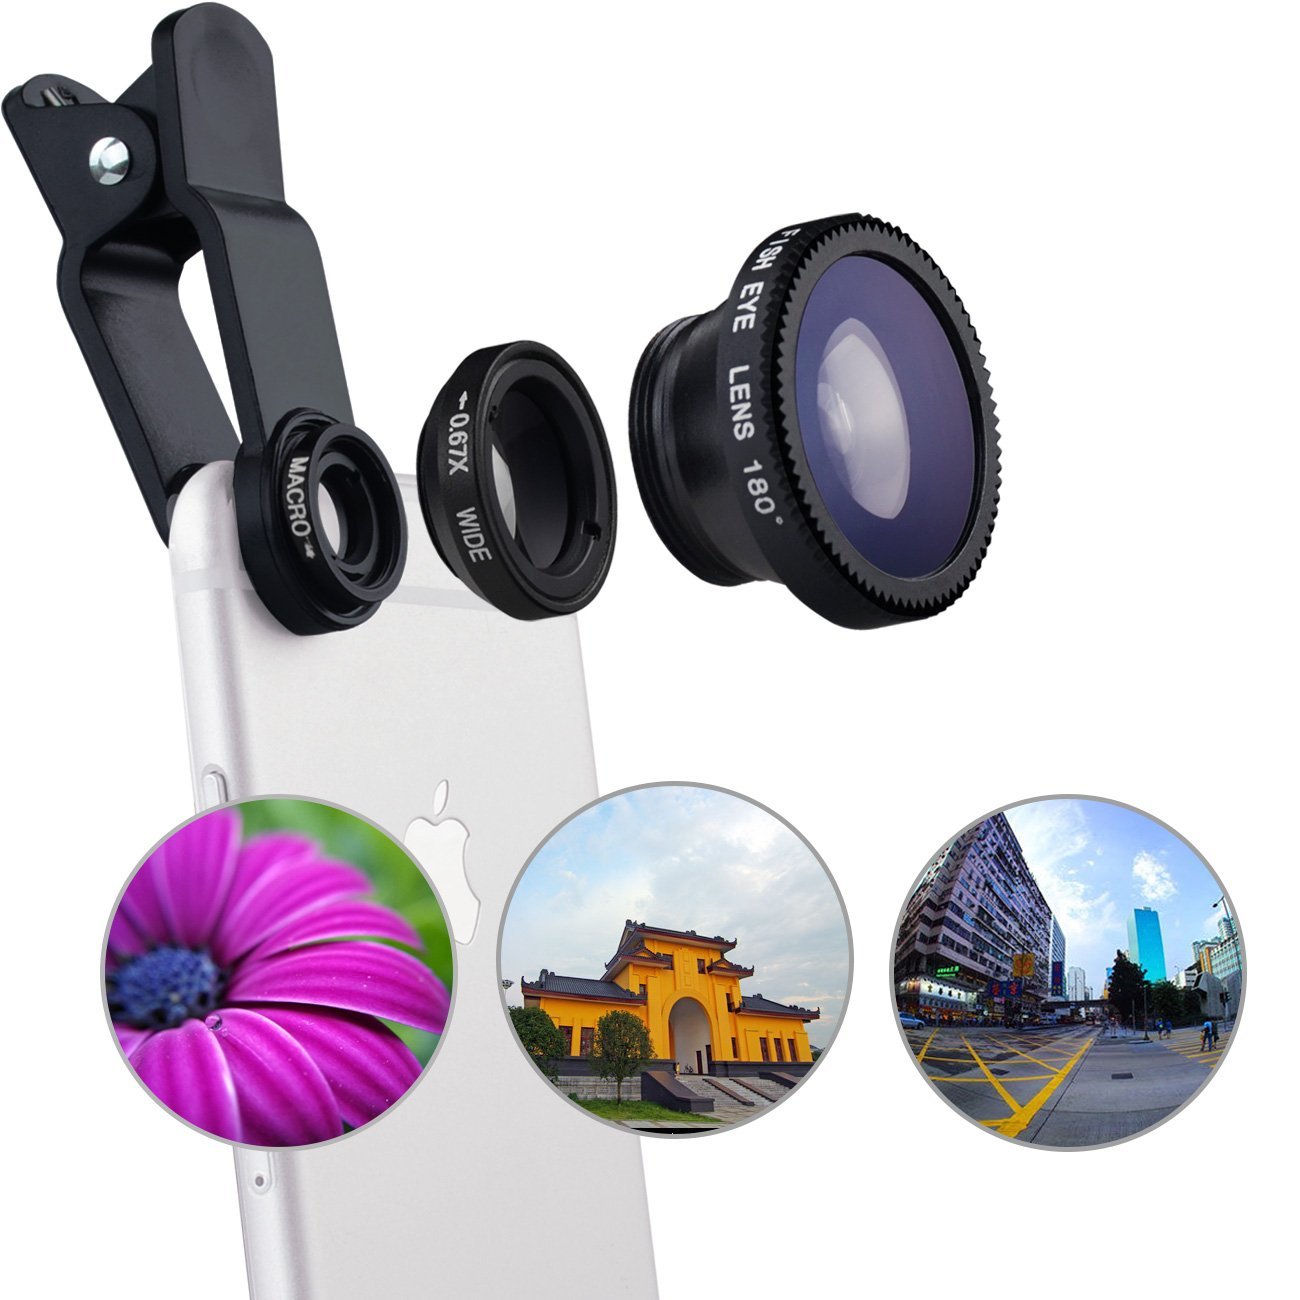 CamPlus - a lens kit for your iPhone/Android - $14